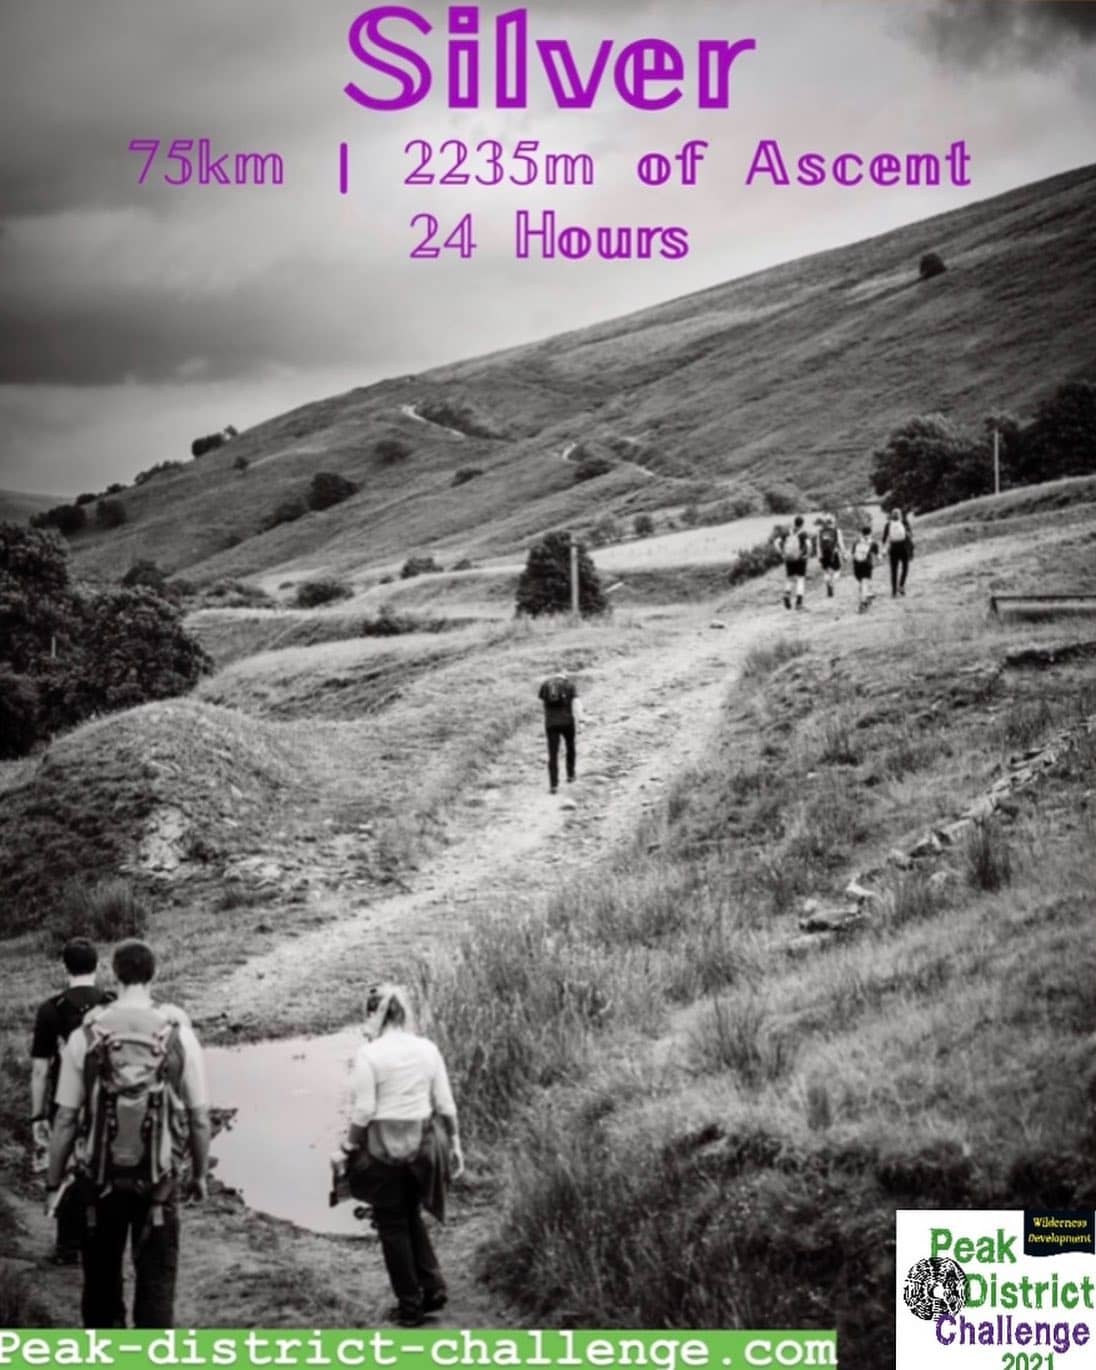 Peak-District-Challenge.com registrations are open with total entry fees for our Silver Challenge...